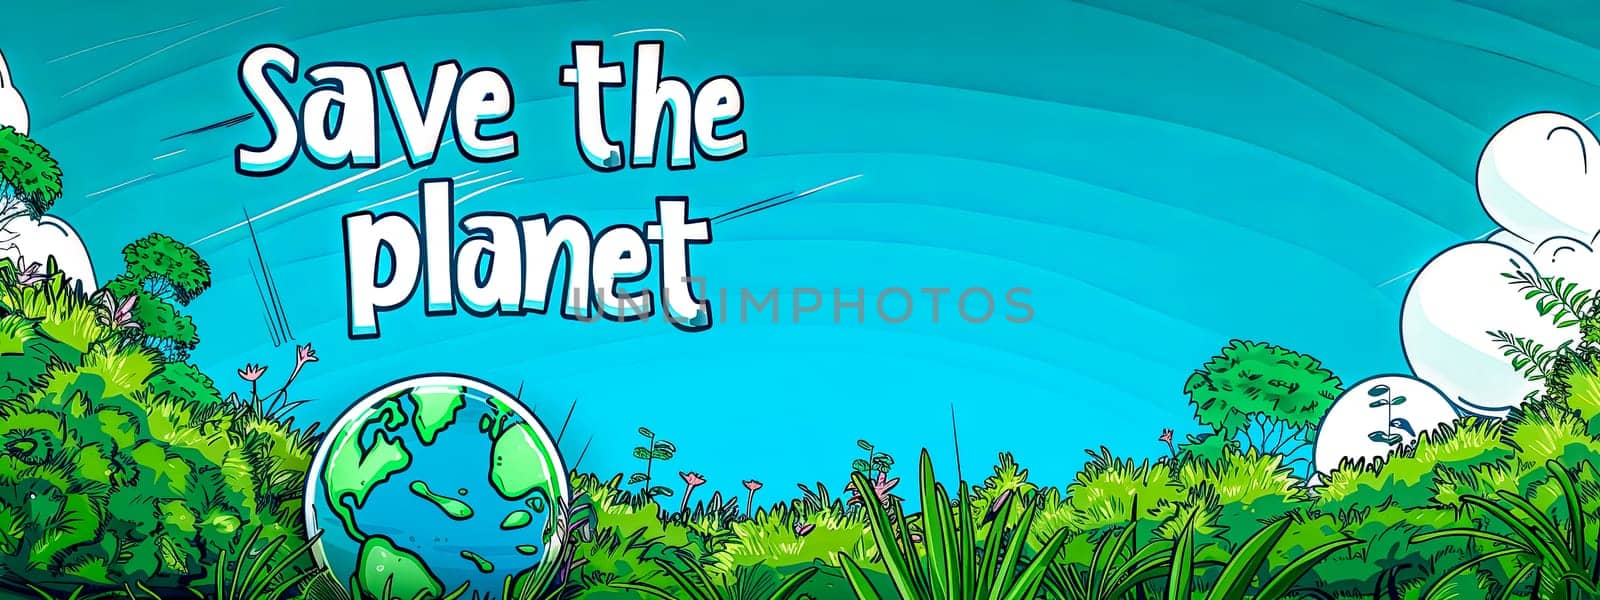 Save the planet eco-friendly banner by Edophoto